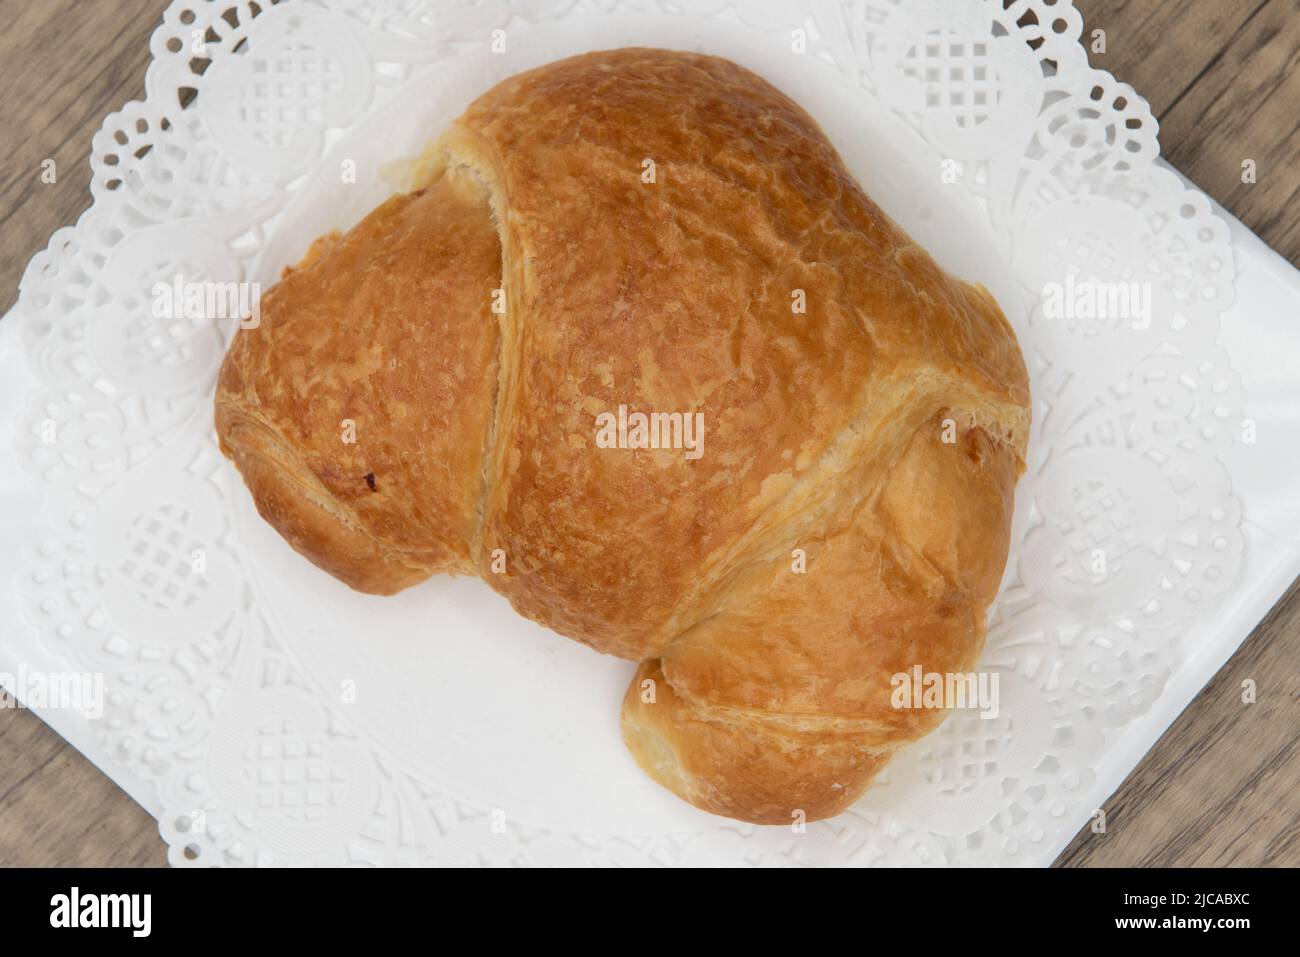 Overhead view of tempting fresh from the oven ham and cheese croissant from the bakery served on a plate. Stock Photo